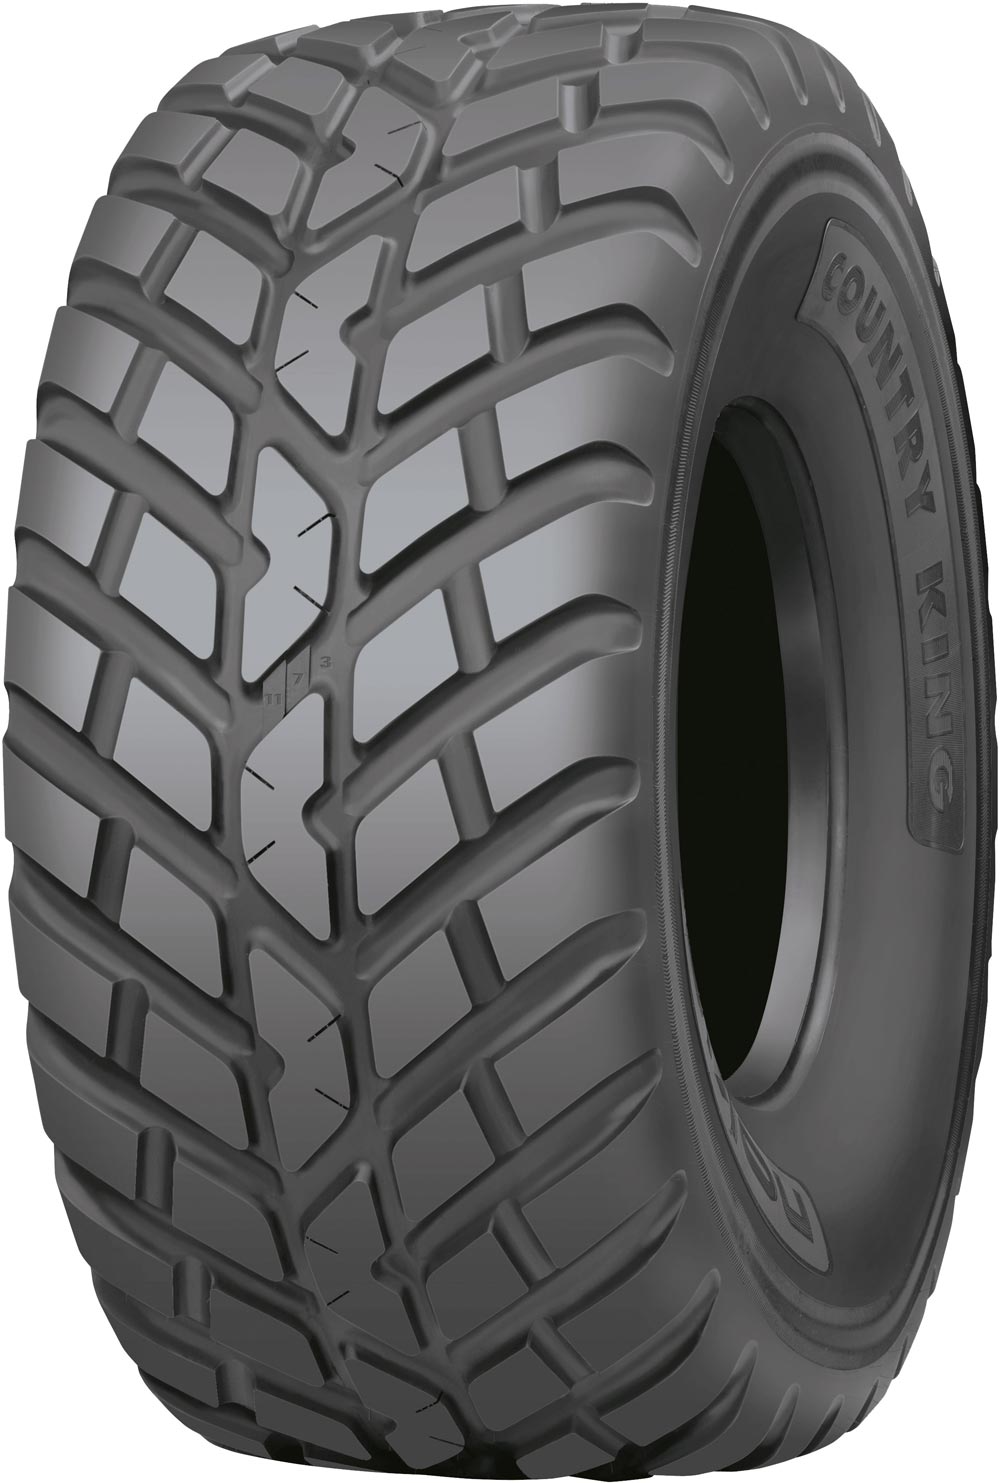 product_type-industrial_tires NOKIAN COUNTRY KING TL 650/50 R22.5 163D